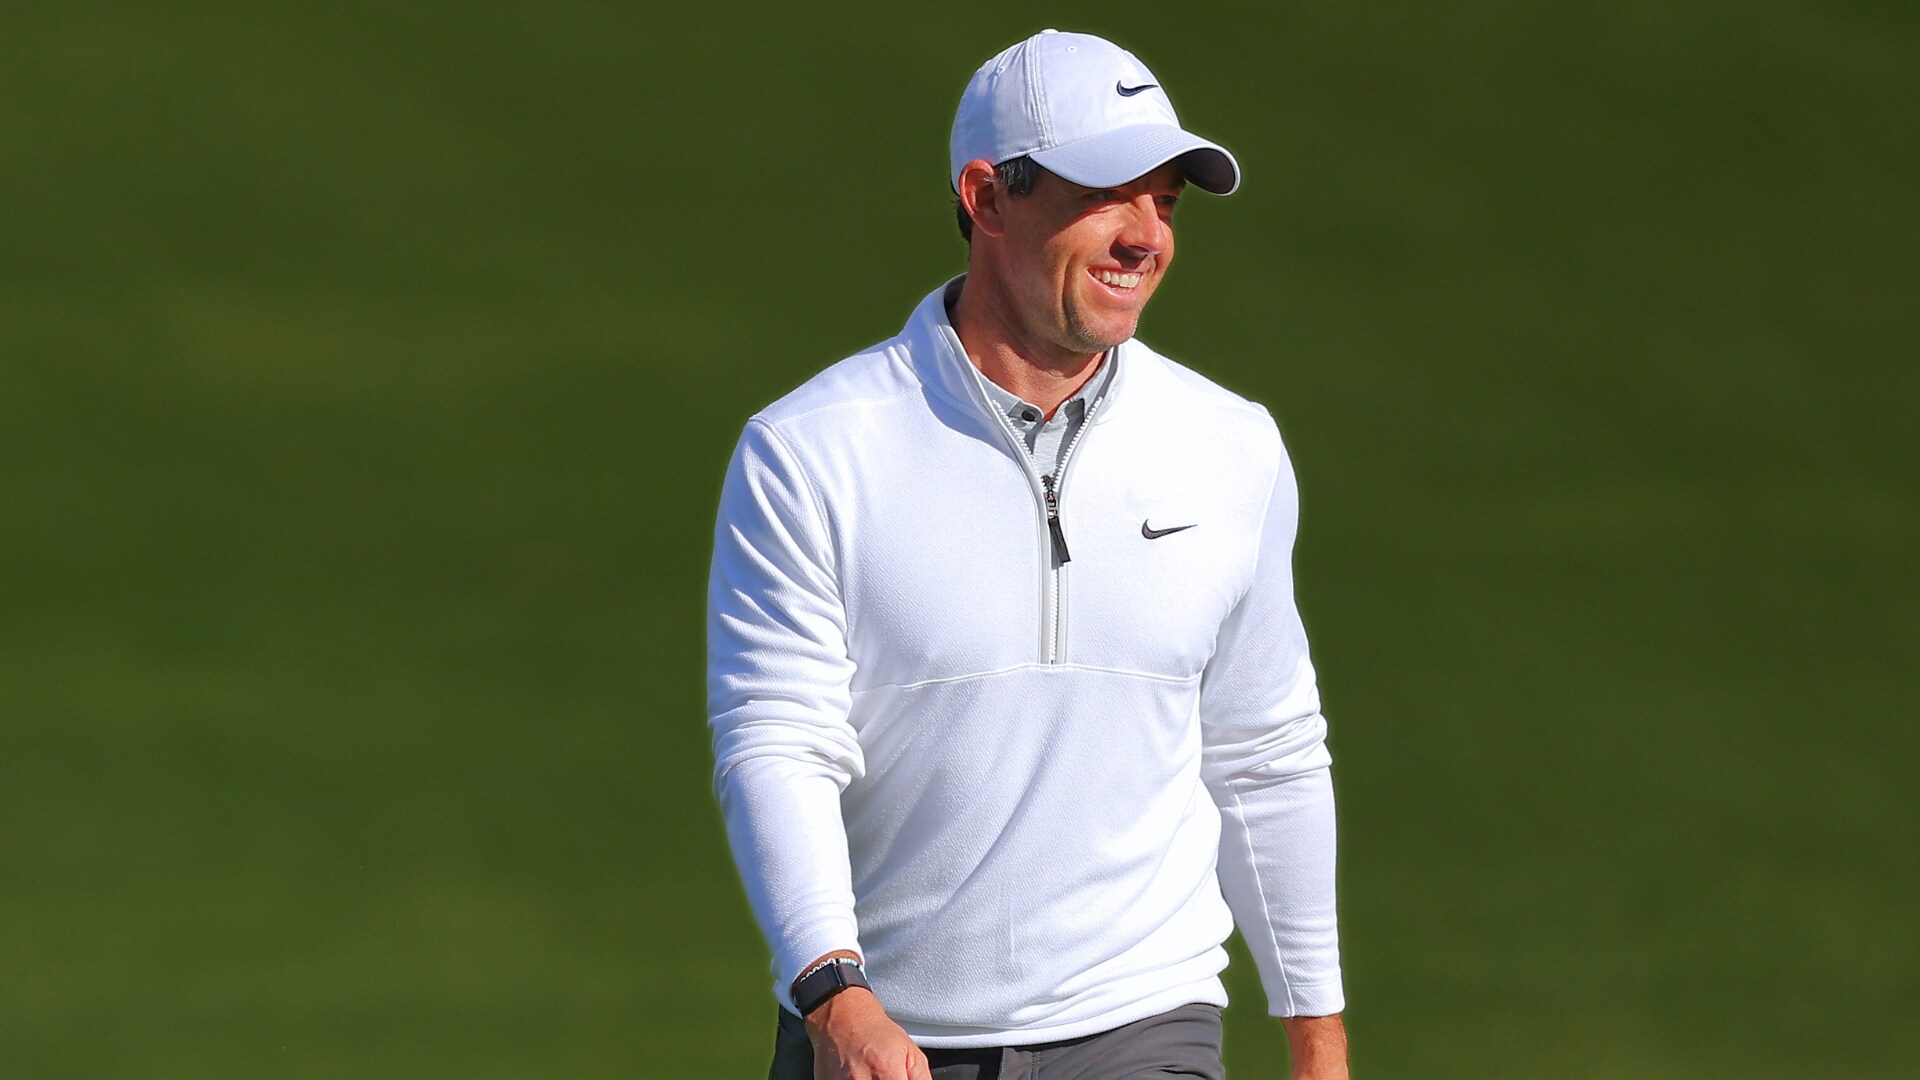 Rory McIlroy’s annual Quail Hollow birthday celebration also marks a pivotal reset this year